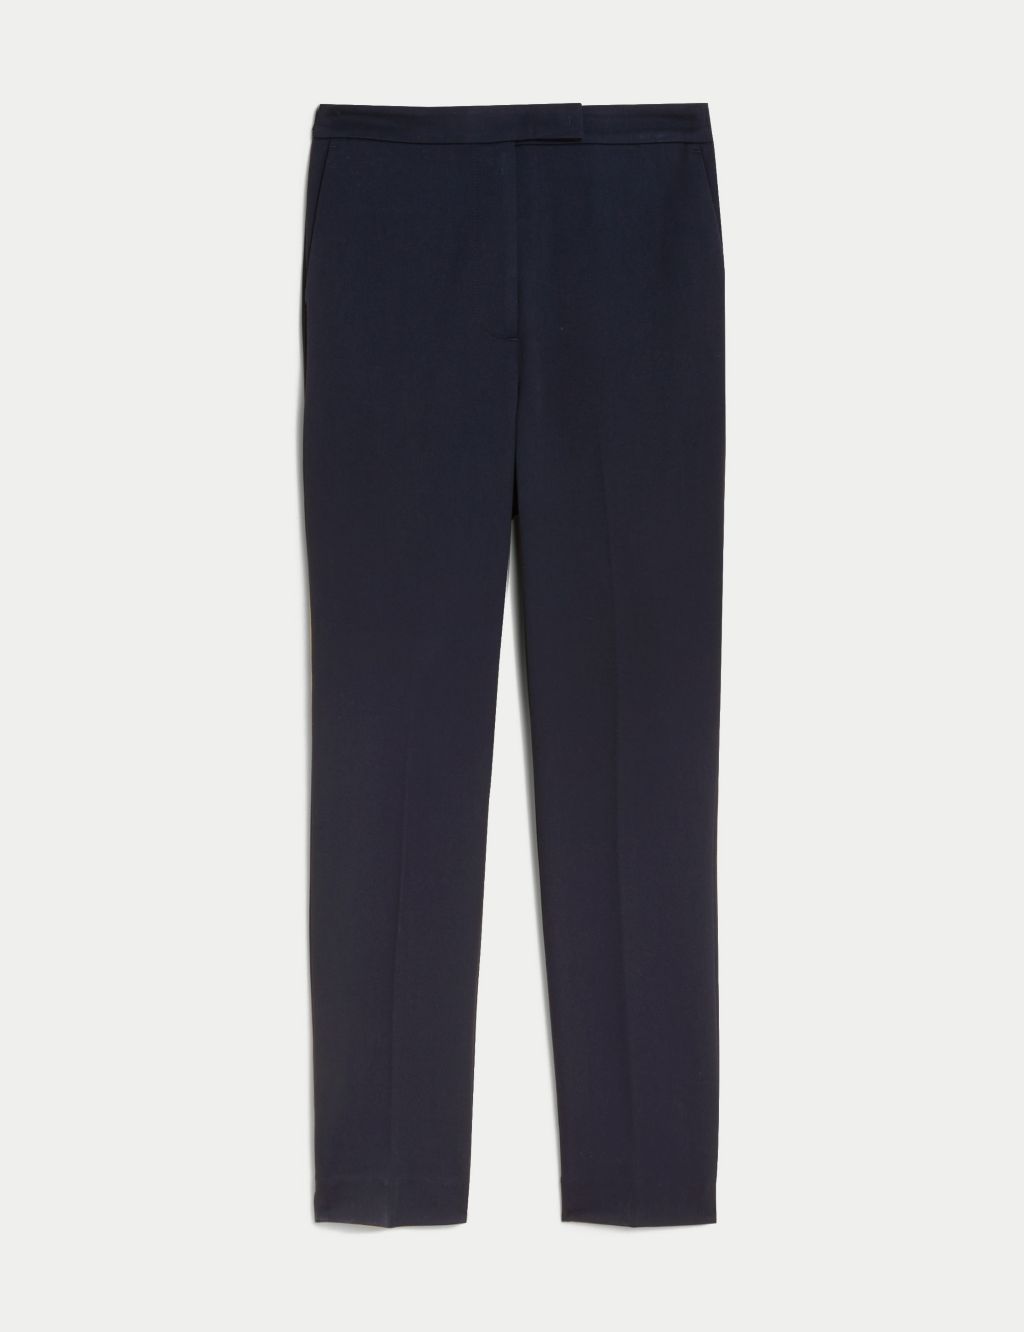 Slim Fit Ankle Grazer Trousers image 2